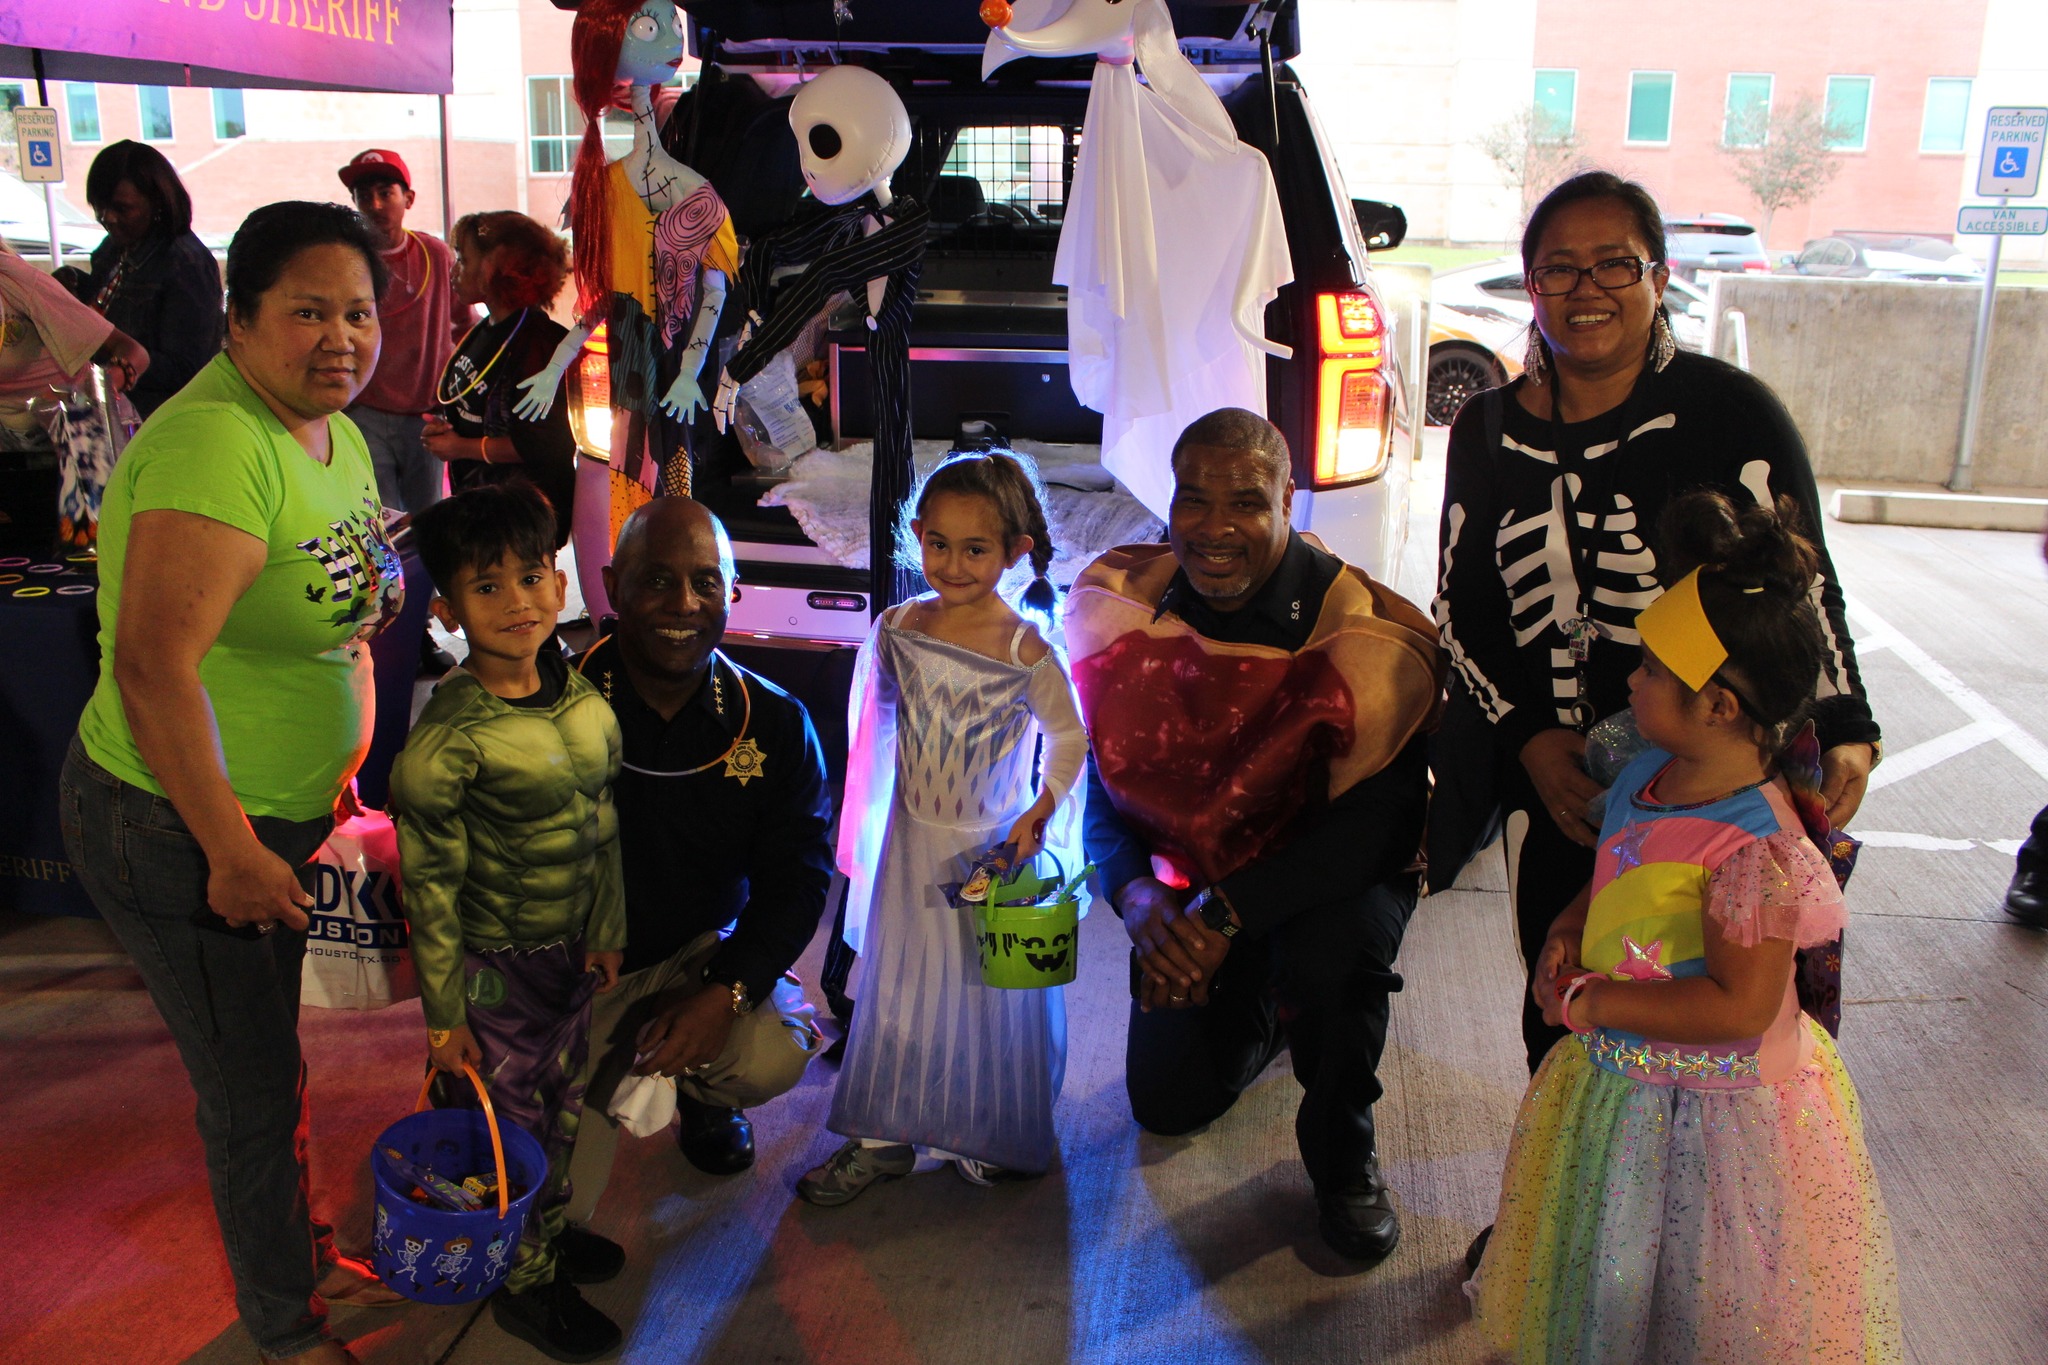 Fort Bend County Sheriff's Office Partners with Multiple Agencies to Host Annual Trunk or Treat